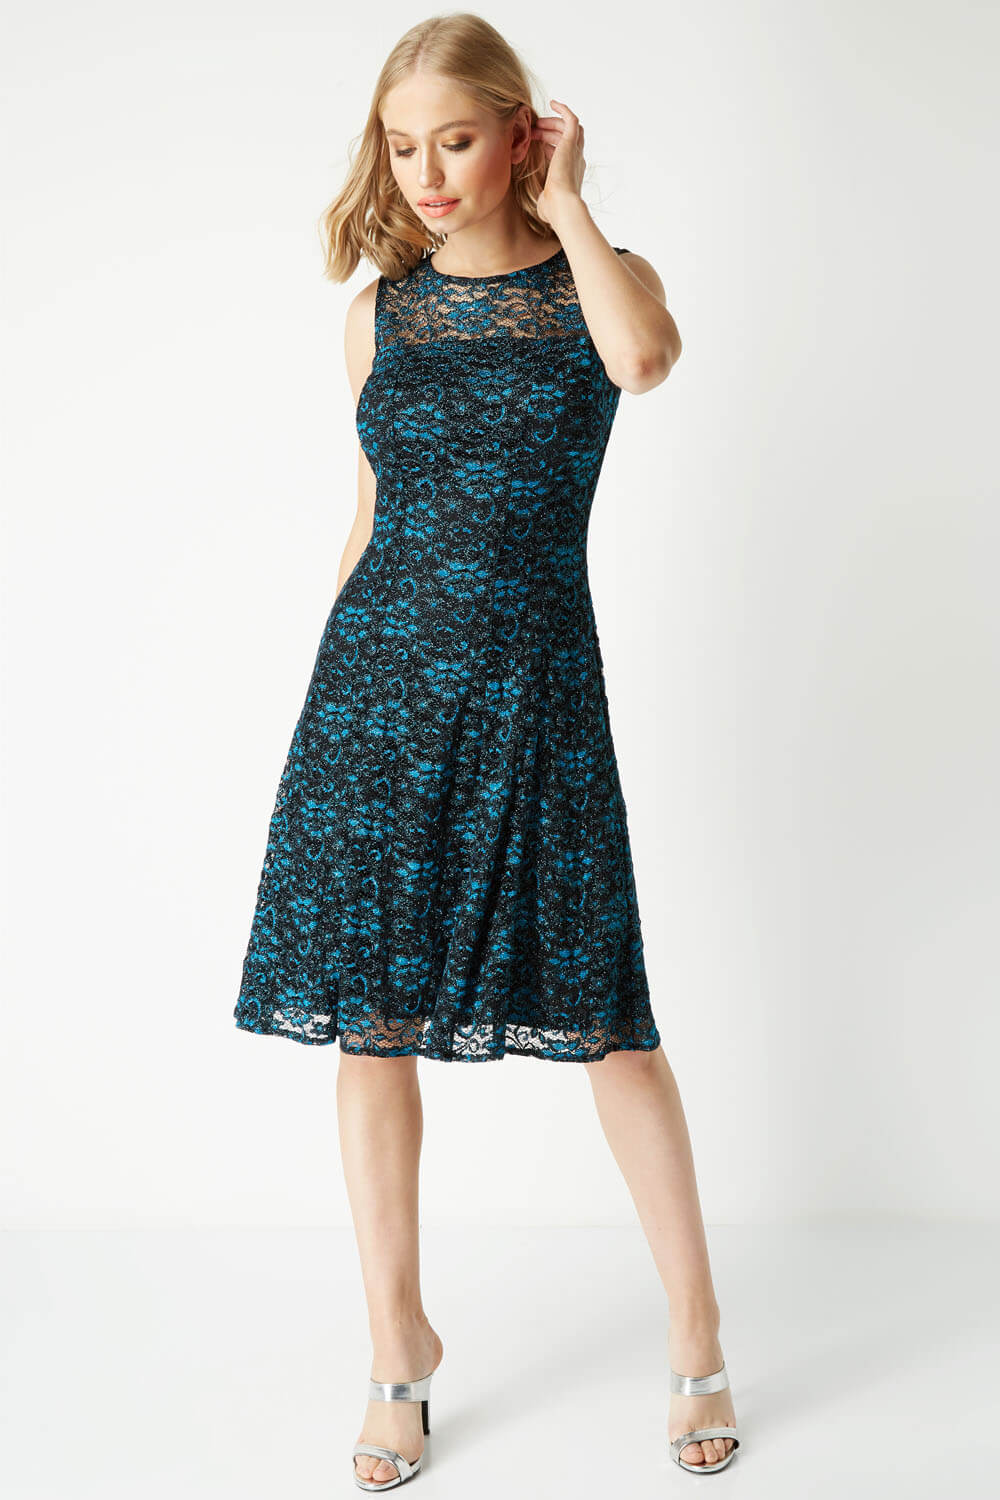 Teal Shimmer Lace Fit and Flare Dress, Image 2 of 5